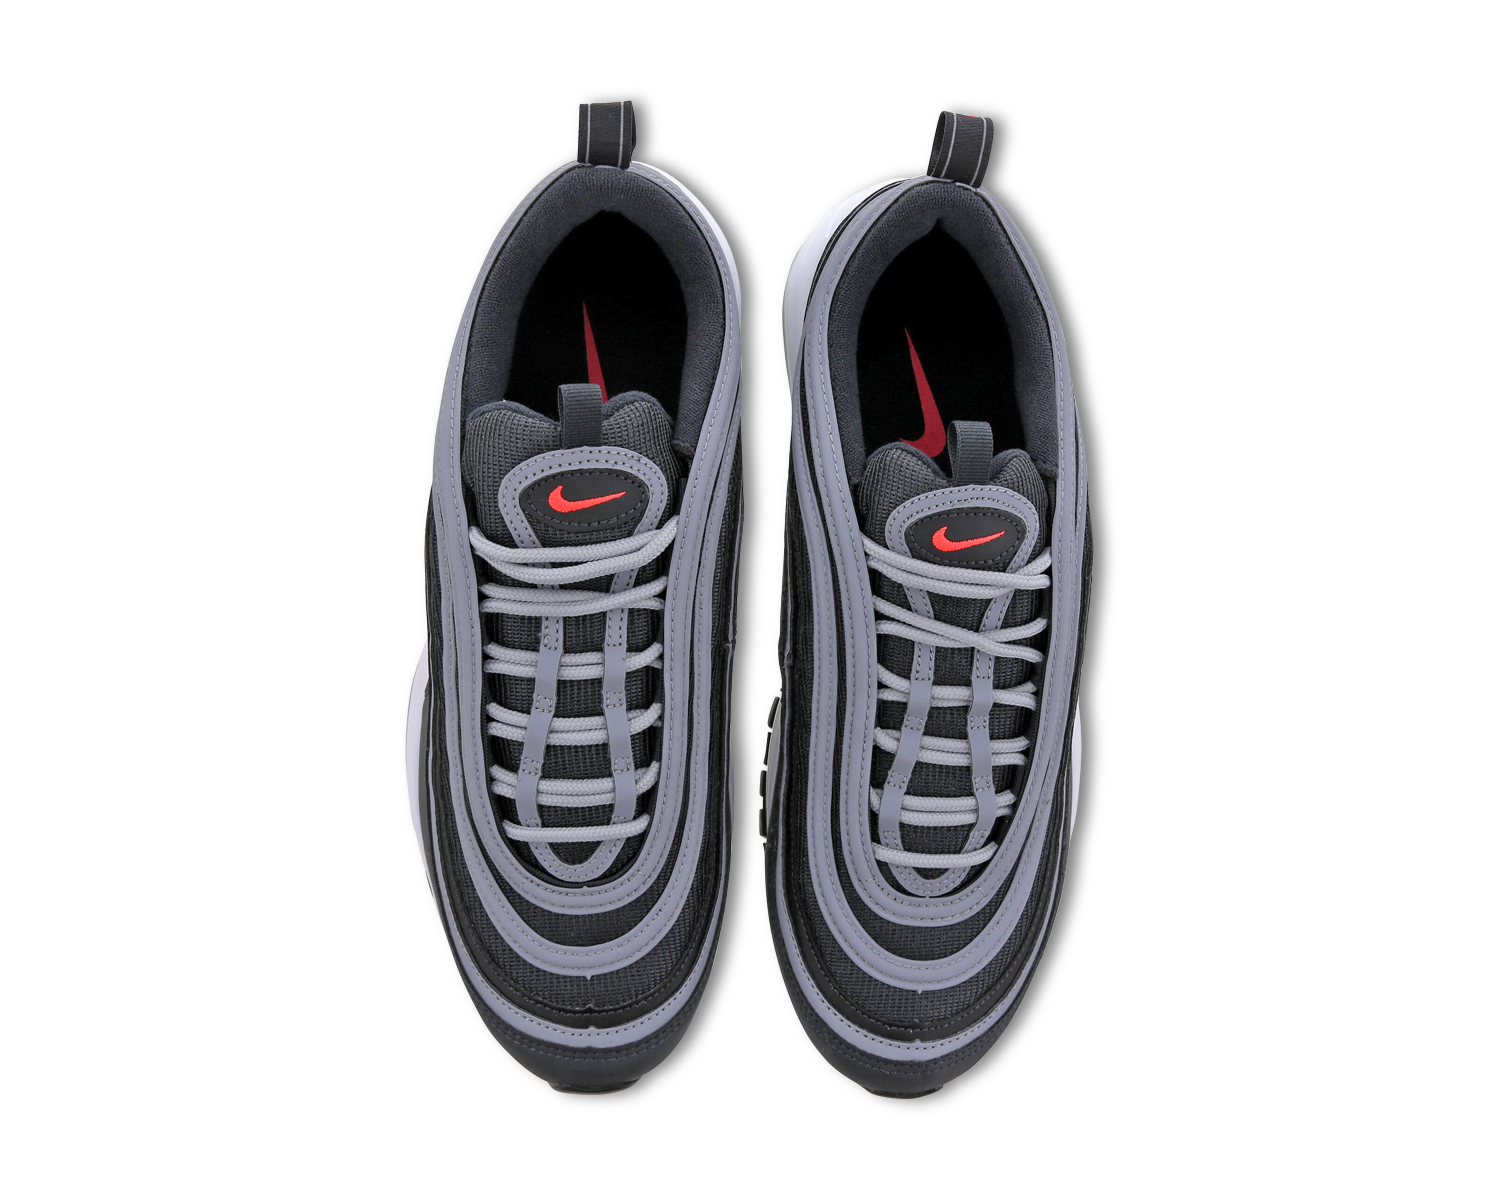 where to buy nike air max 97